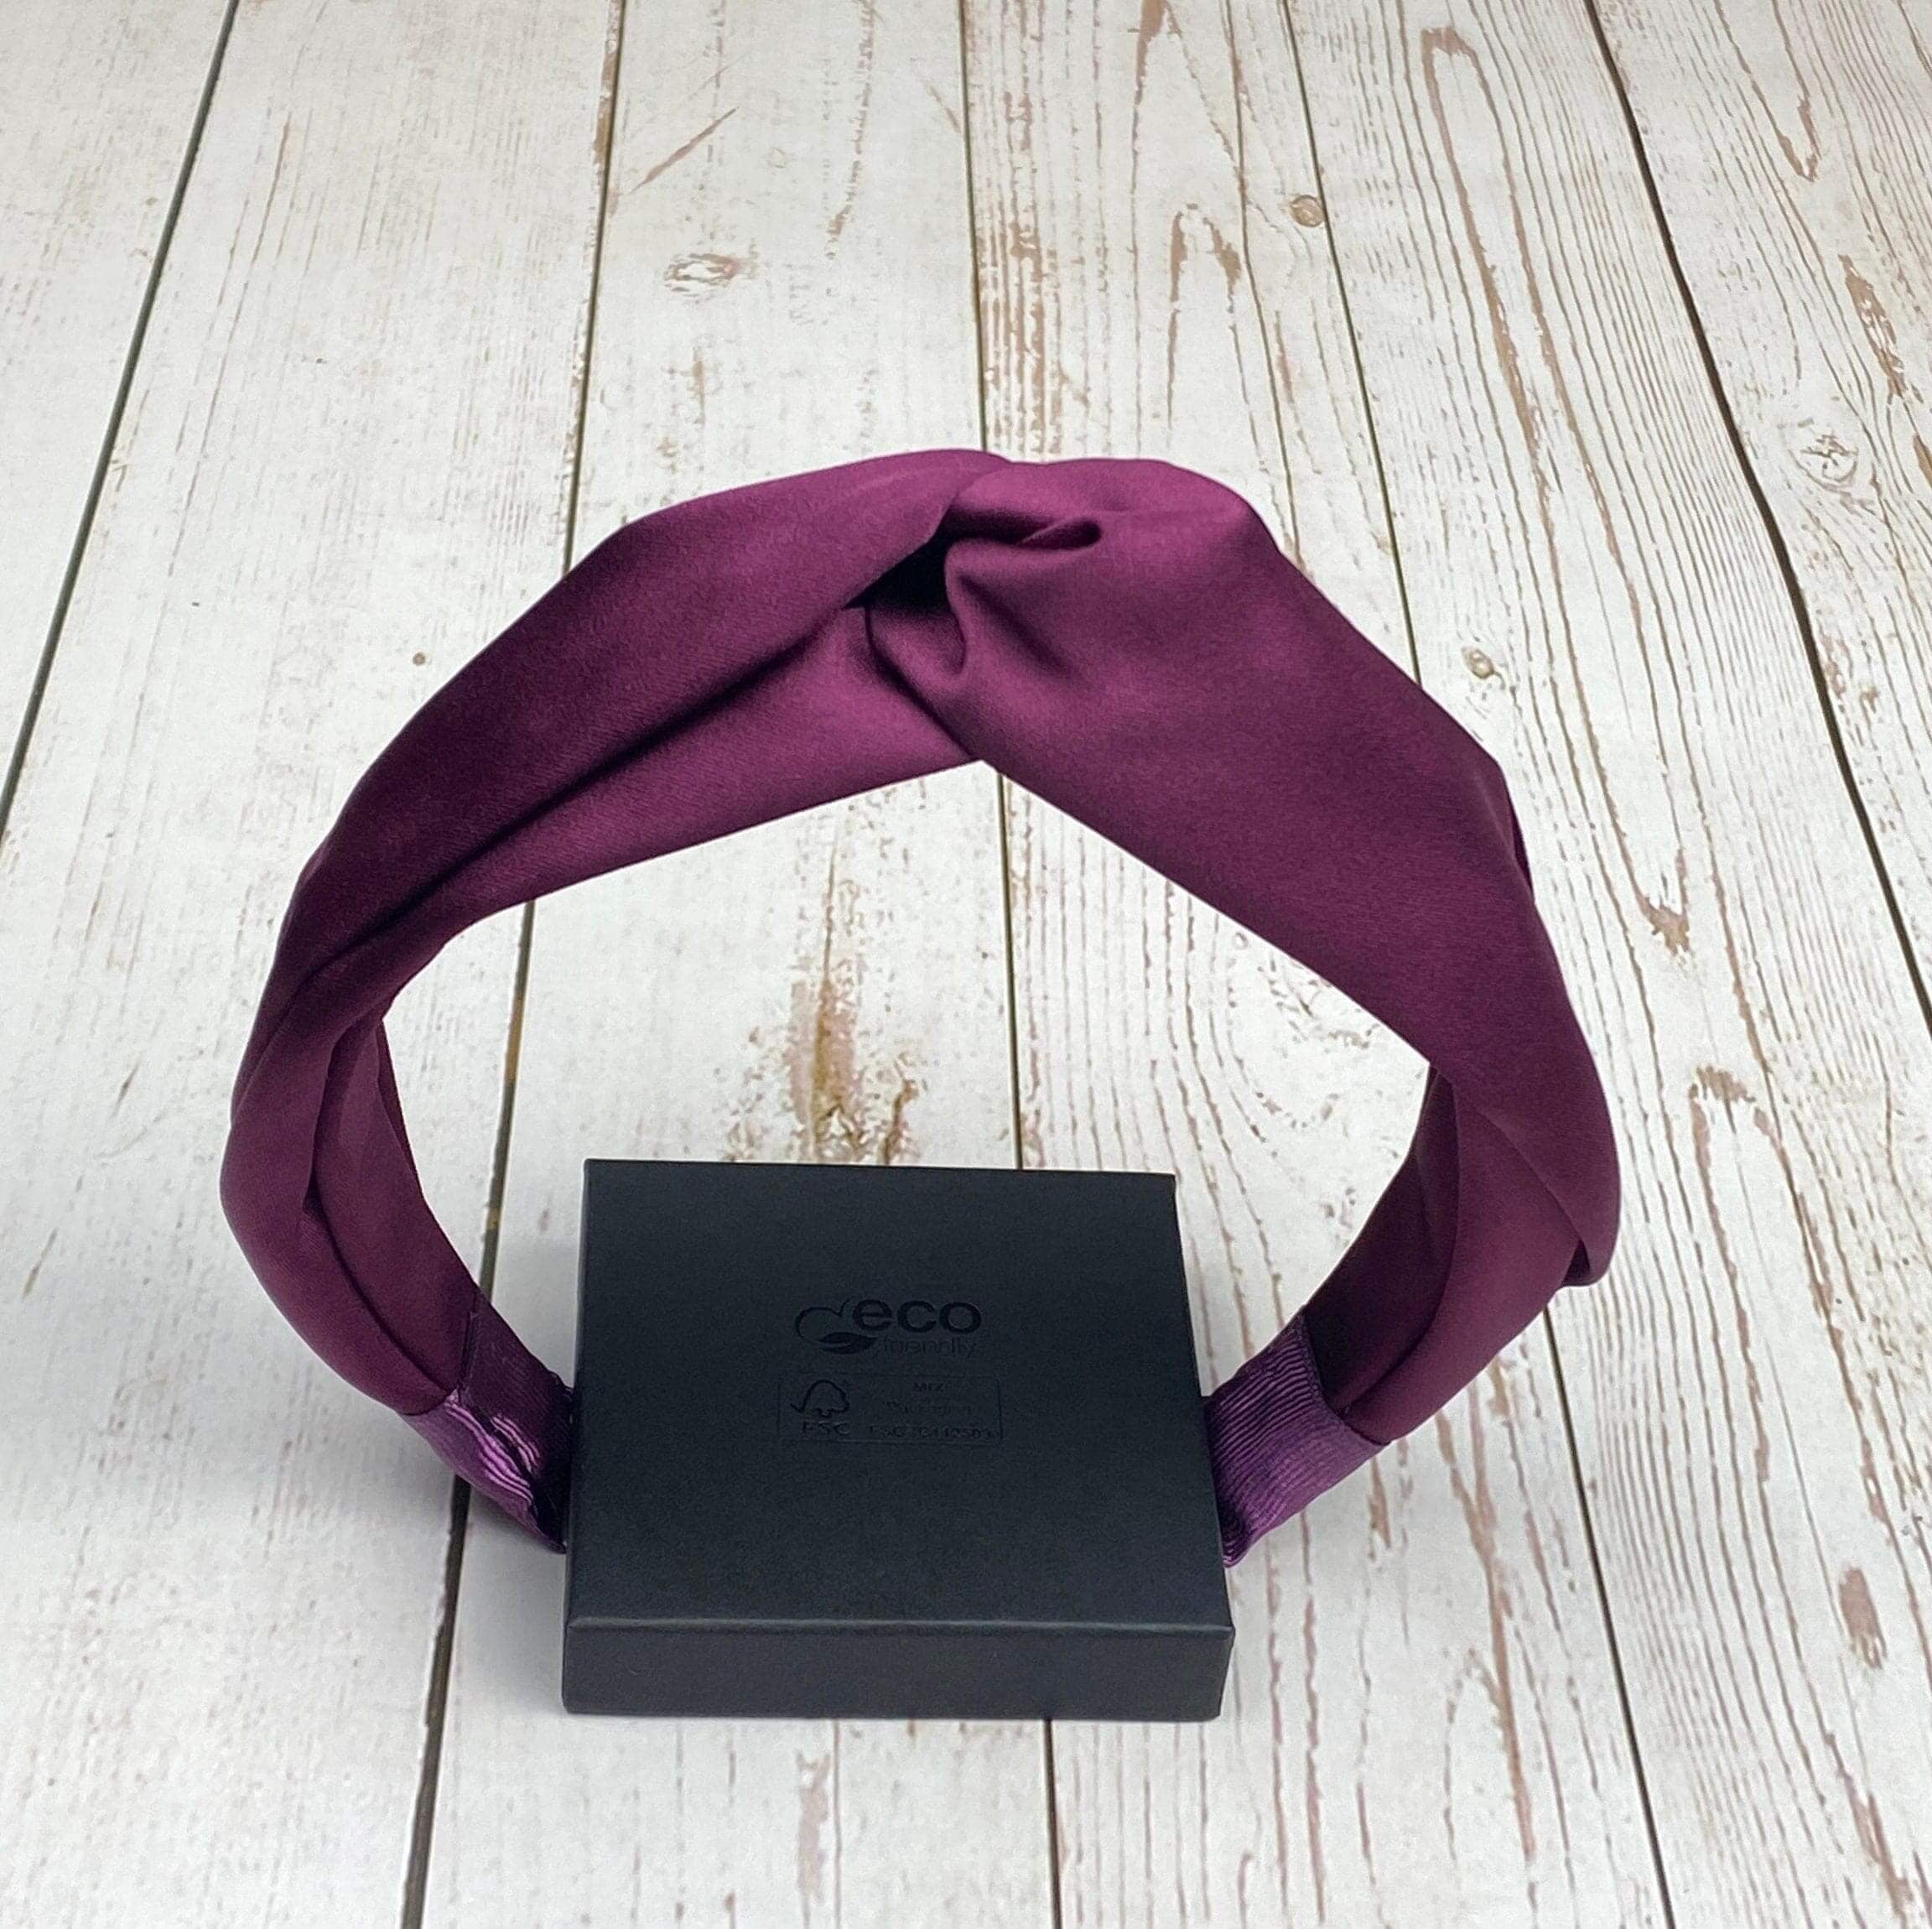 Stay stylish all day long with our variety of fashion hairbands that come in different colors, styles, and materials to suit your every need. From wide headbands to twist headbands, we have you covered!